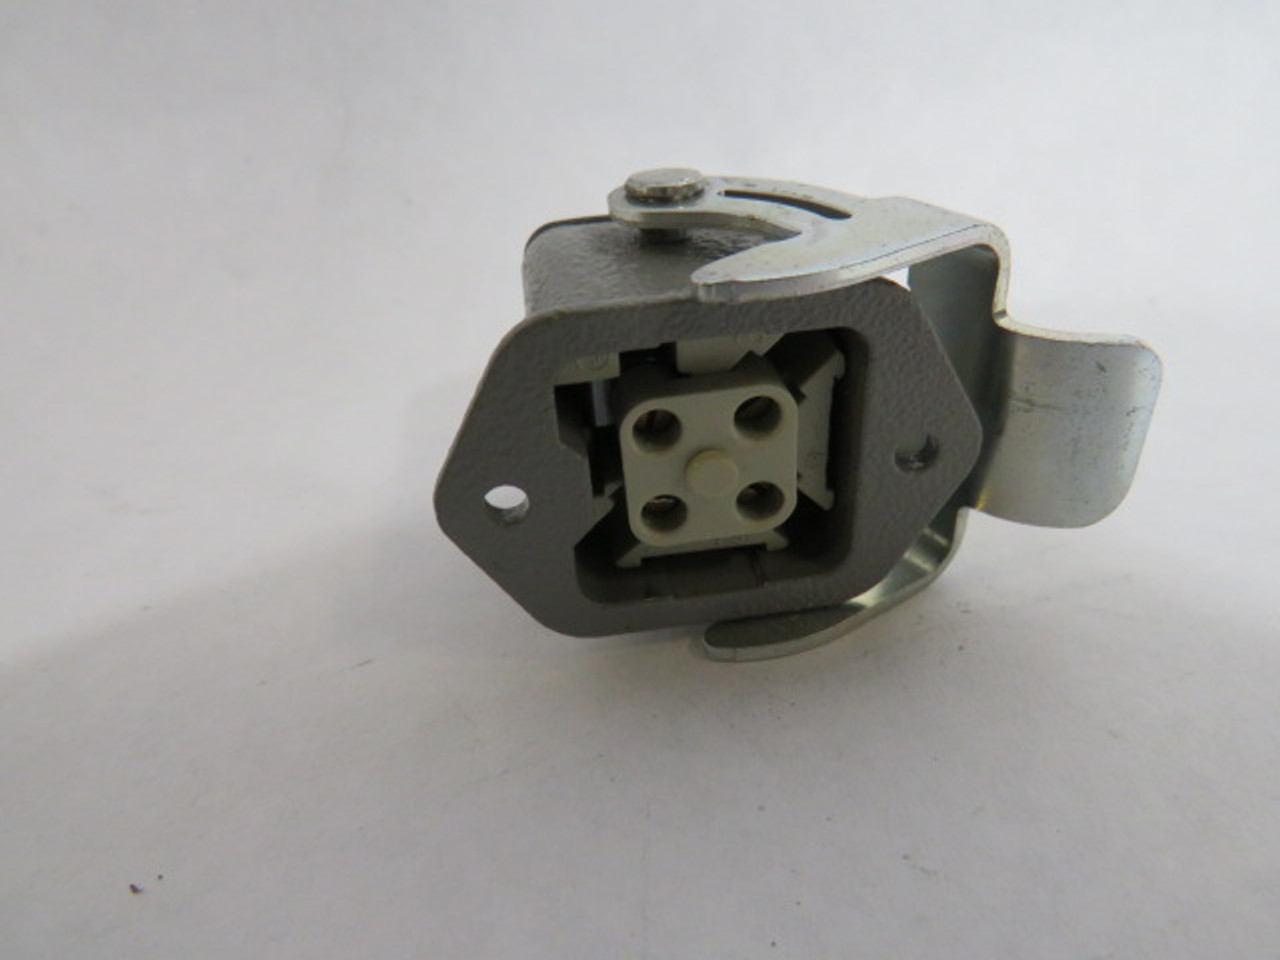 Harting 09200032611 HAN-3A-M4 Male Connector w/Enclosure 4P 10A 250V USED